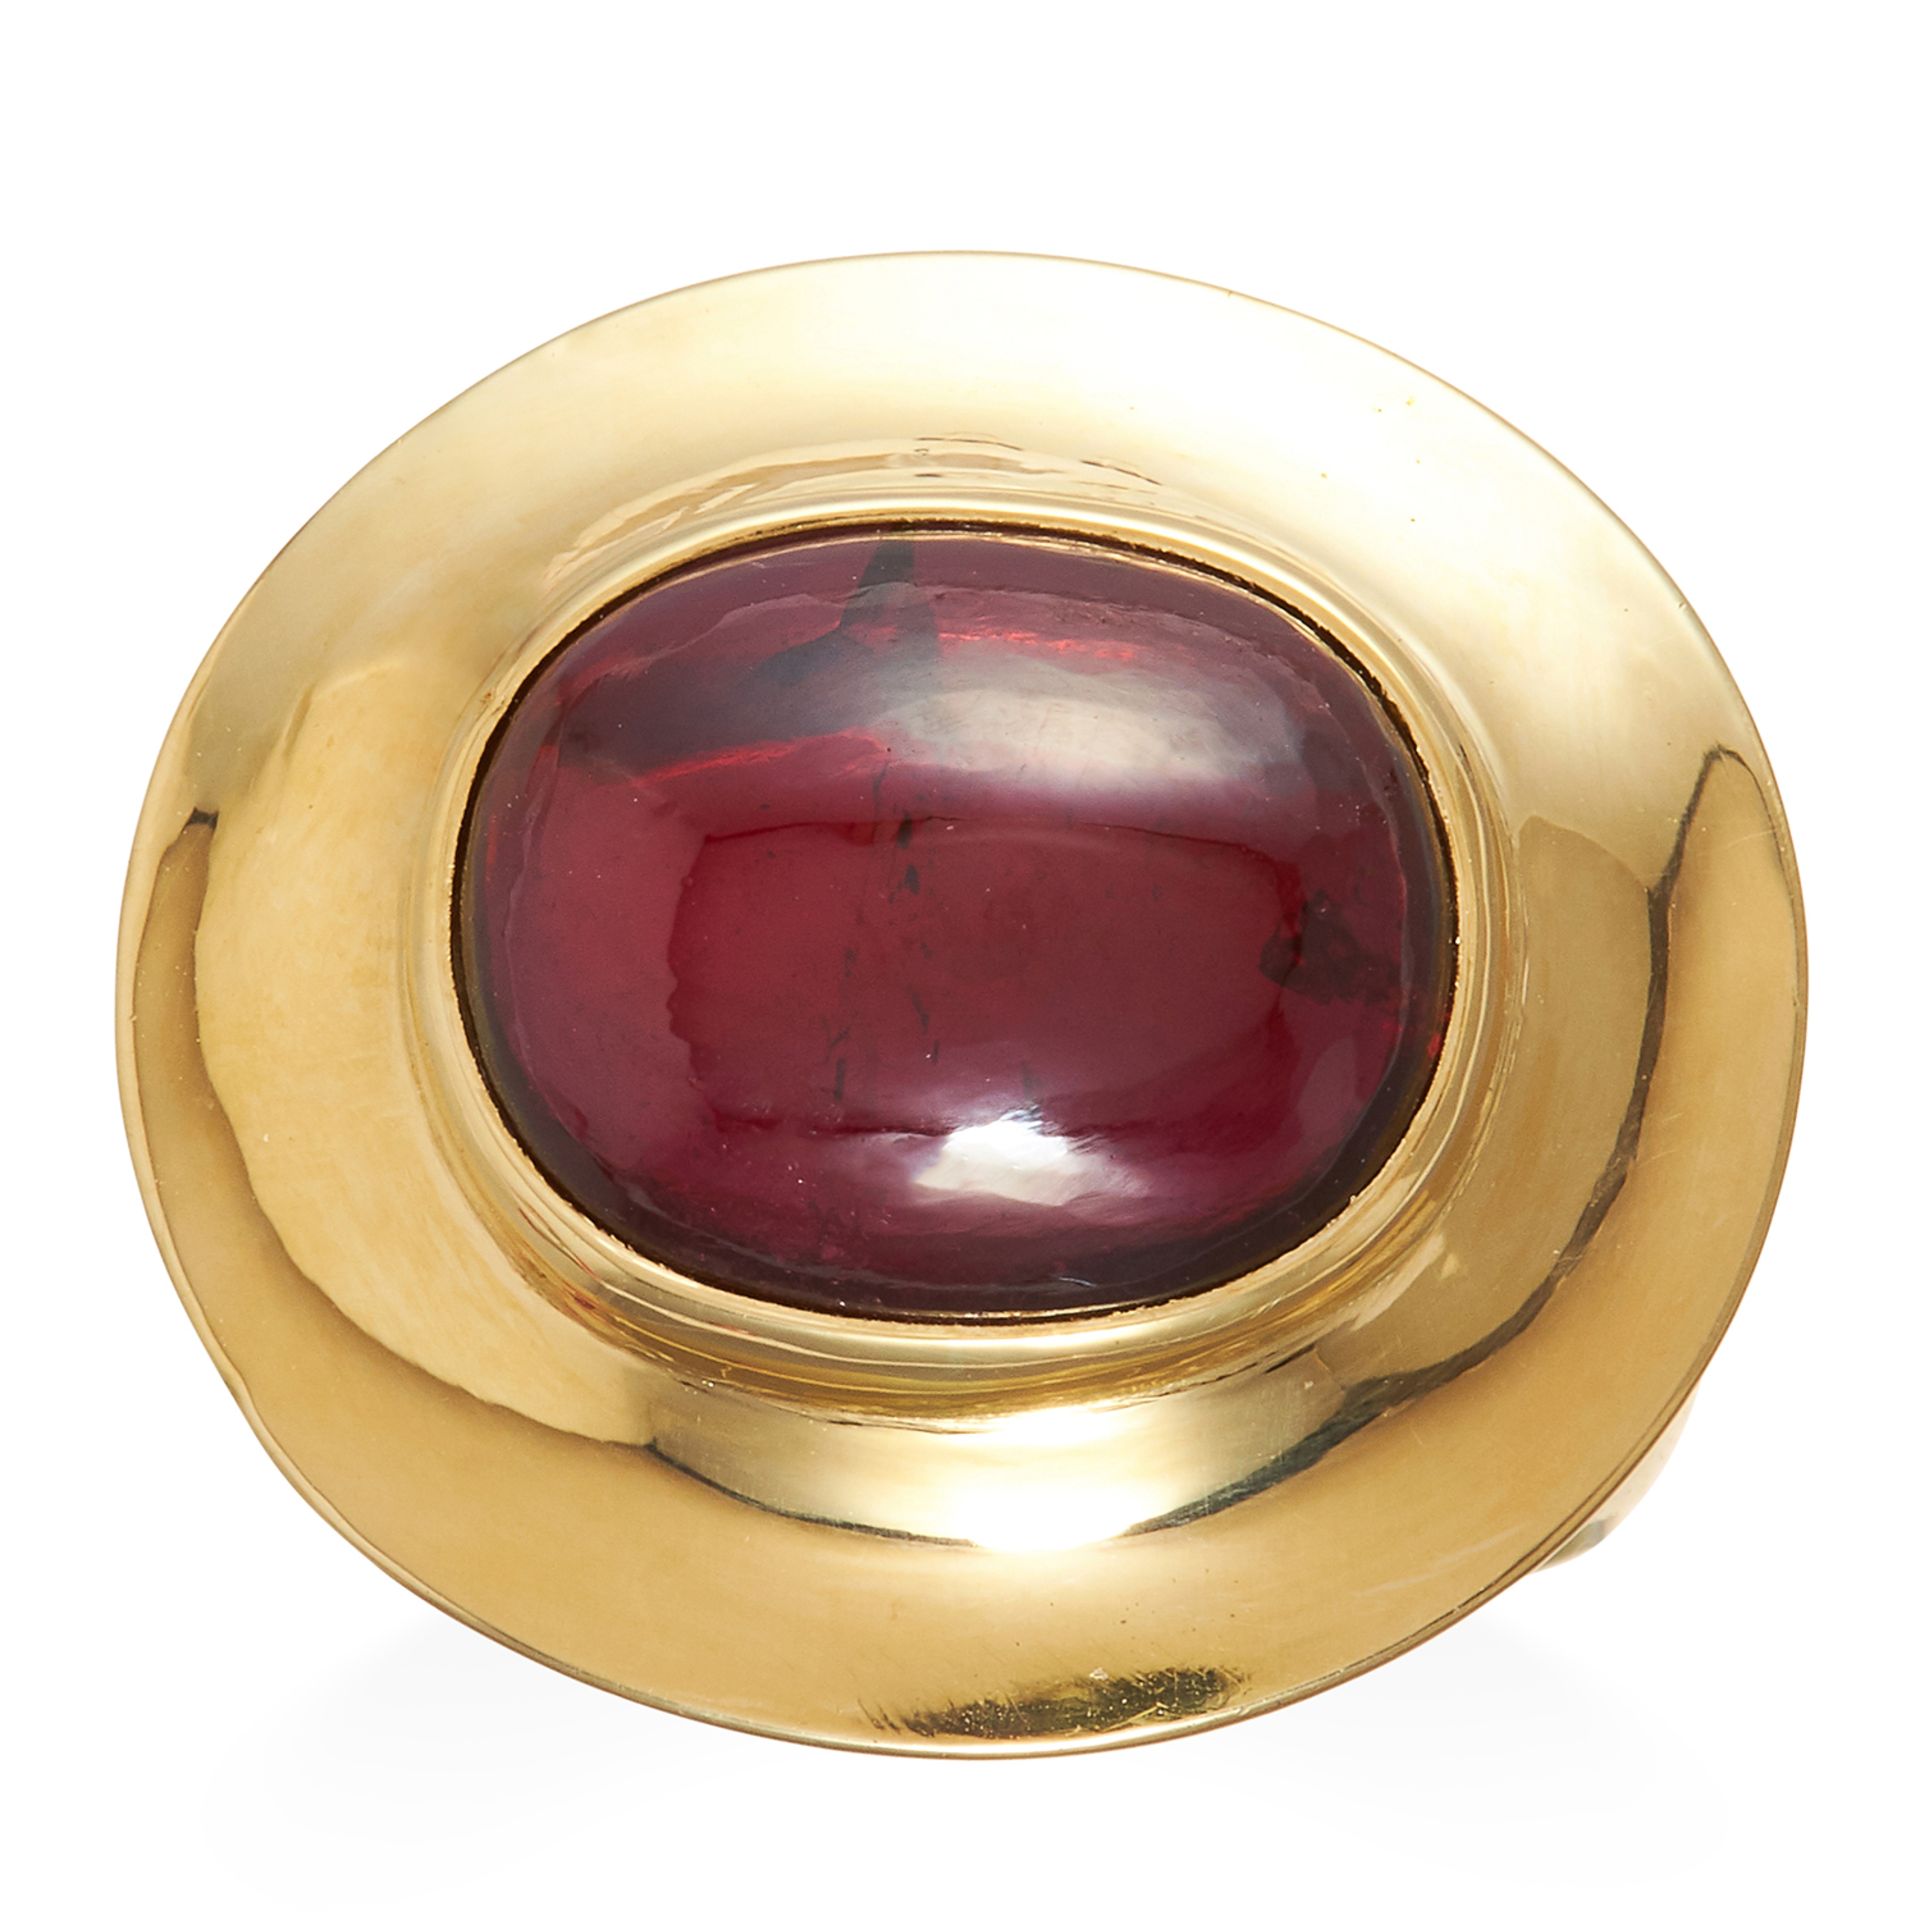 A GARNET RING in 18ct yellow gold, 10.43 carat oval cabochon garnet to a plain surround, stamped